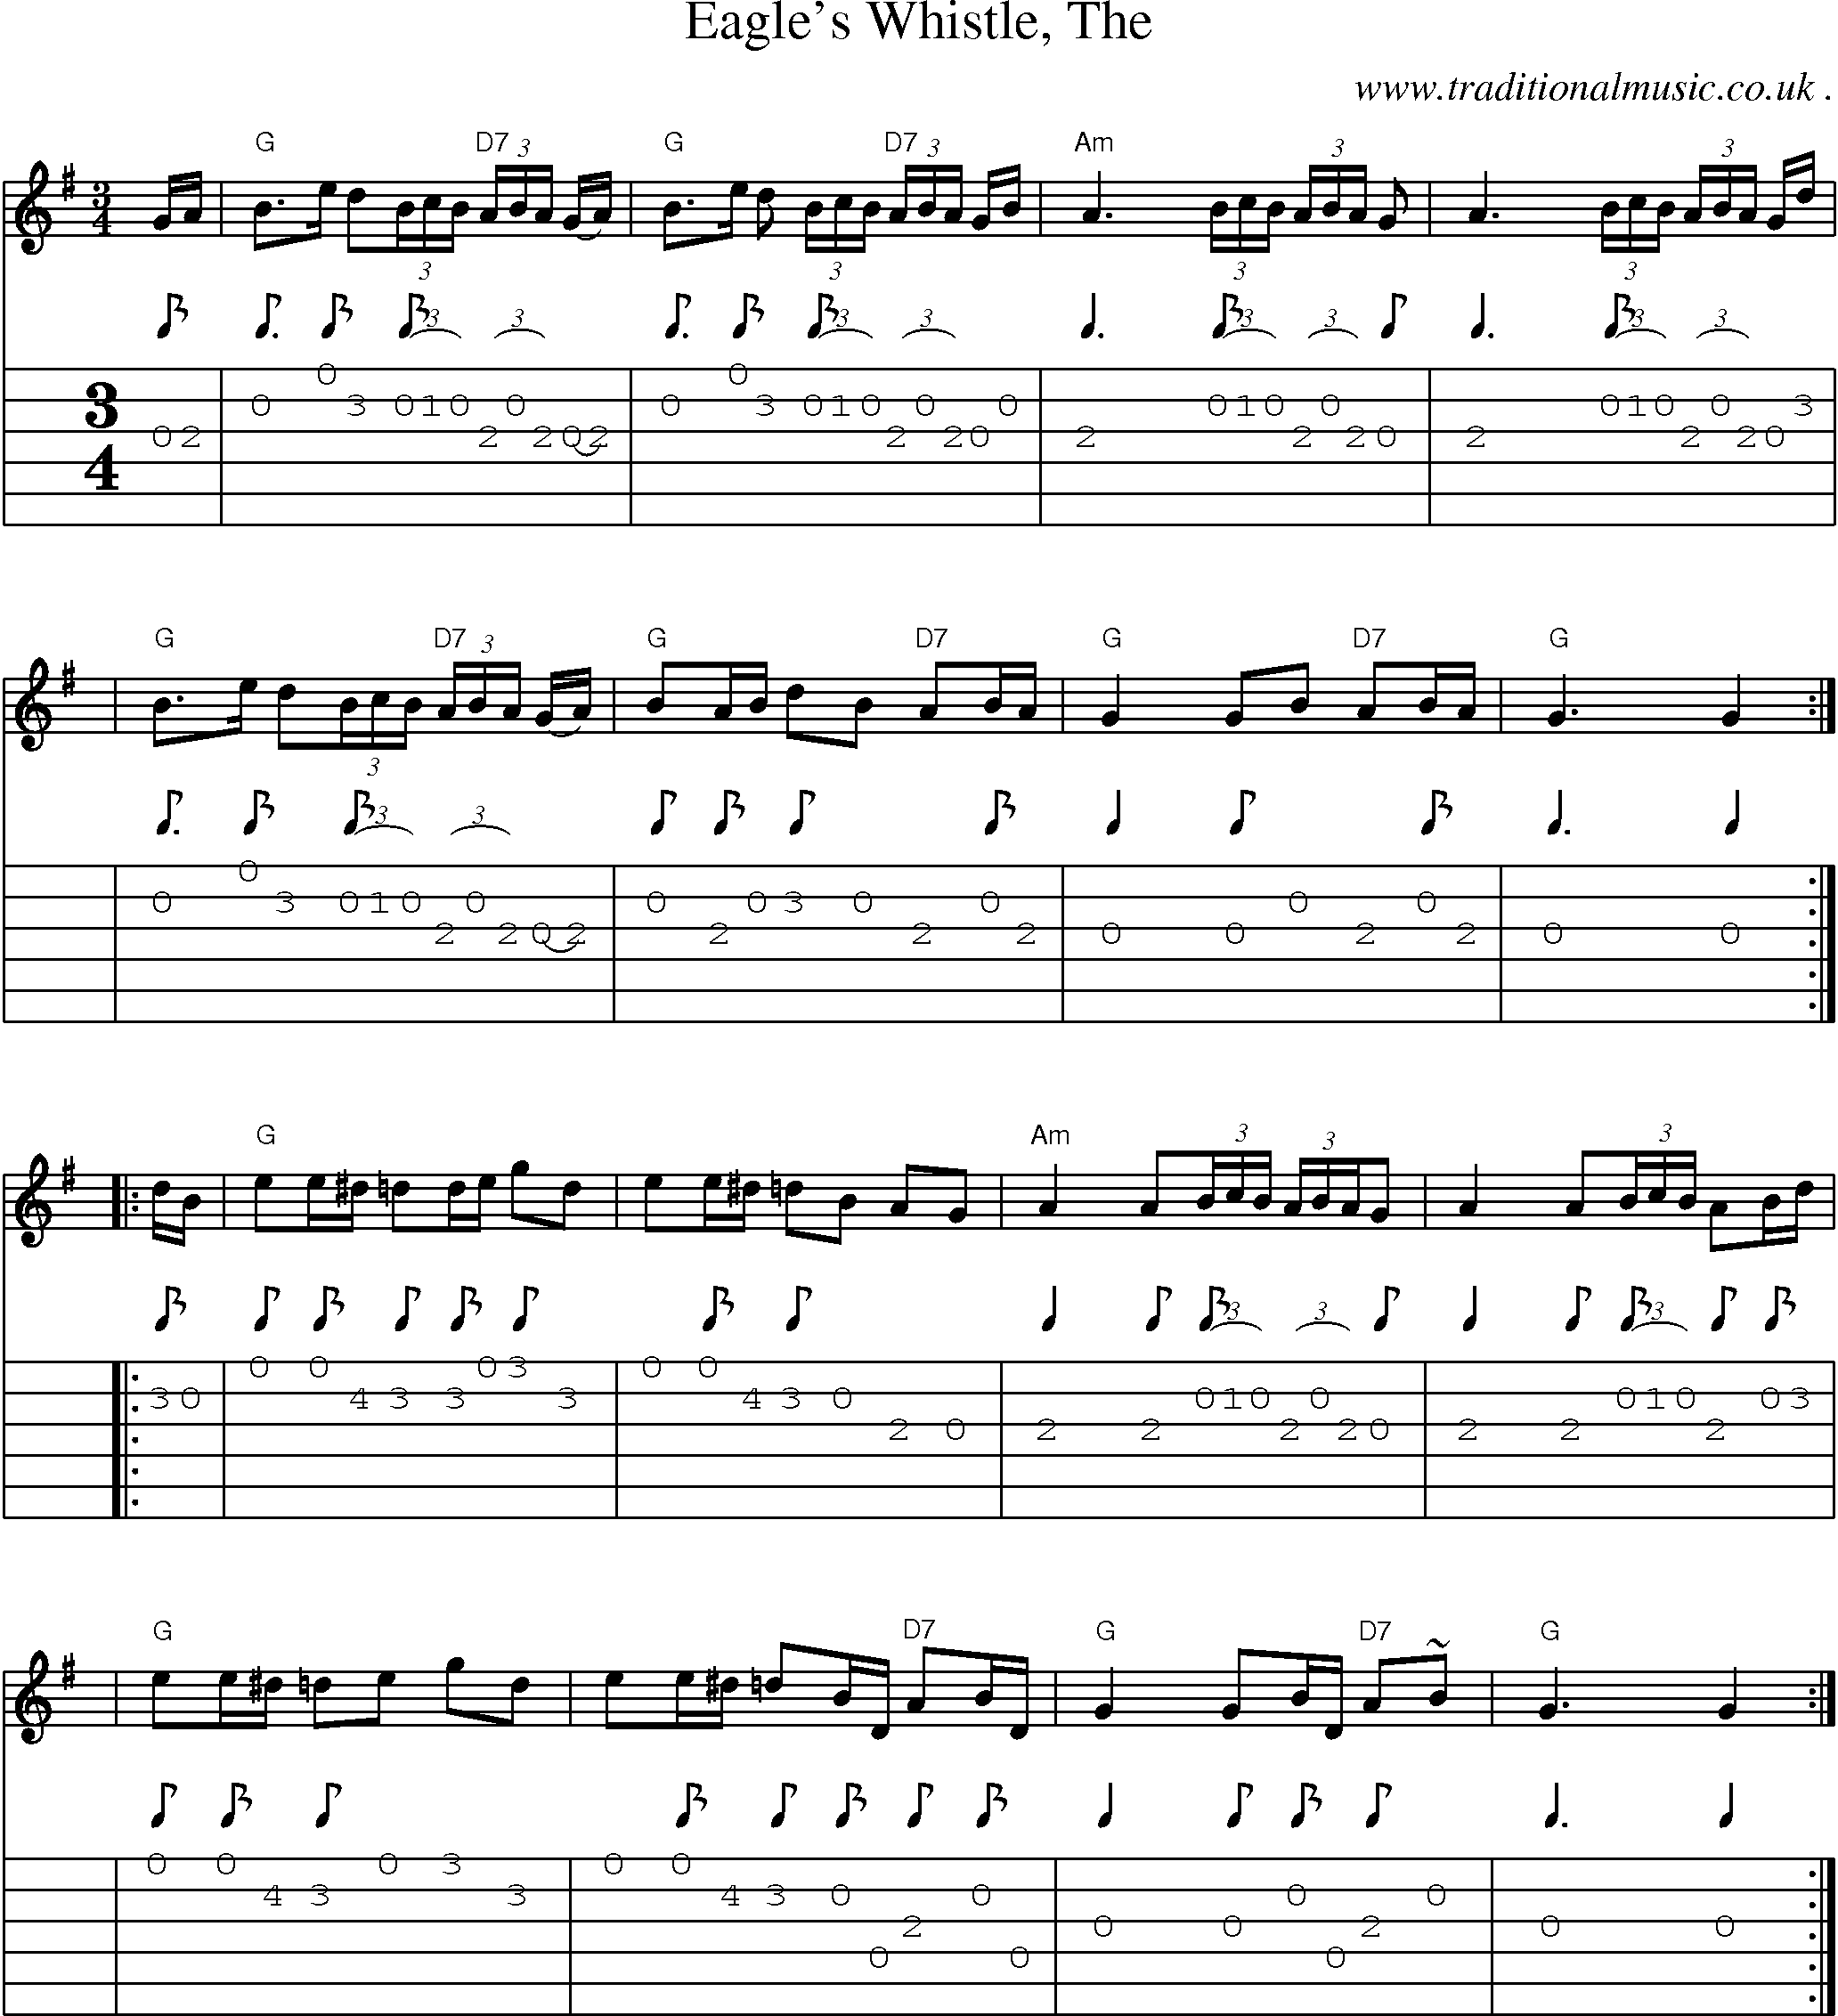 Sheet-music  score, Chords and Guitar Tabs for Eagles Whistle The